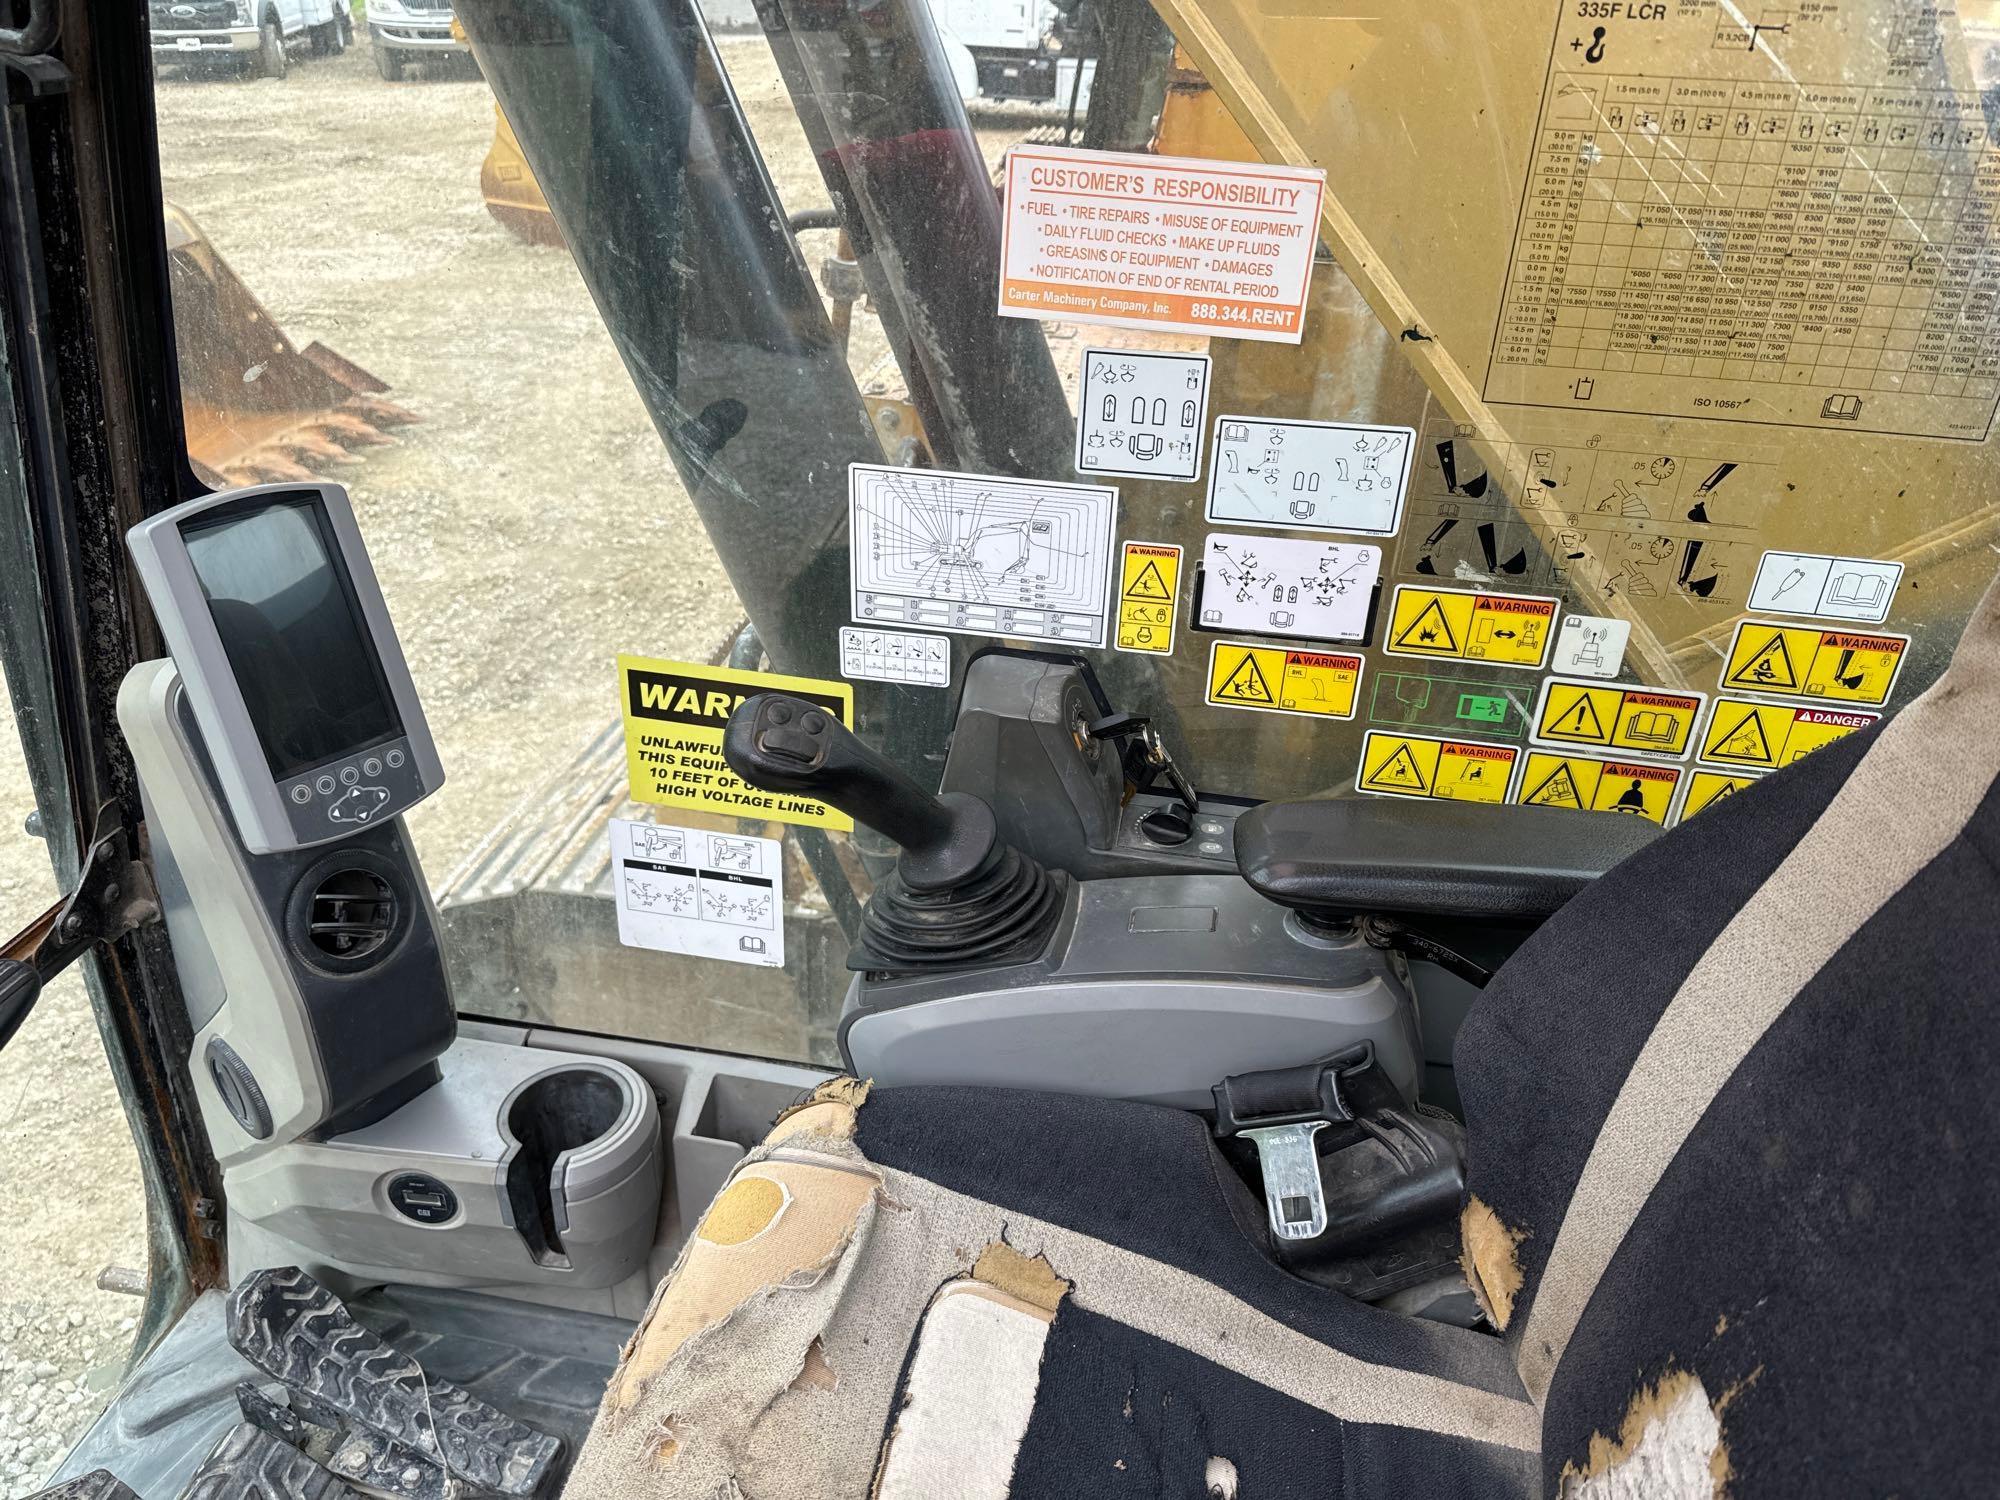 2016 CAT 335FLCR HYDRAULIC EXCAVATOR SN:KNE00510 powered by Cat C7.1 diesel engine, equipped with